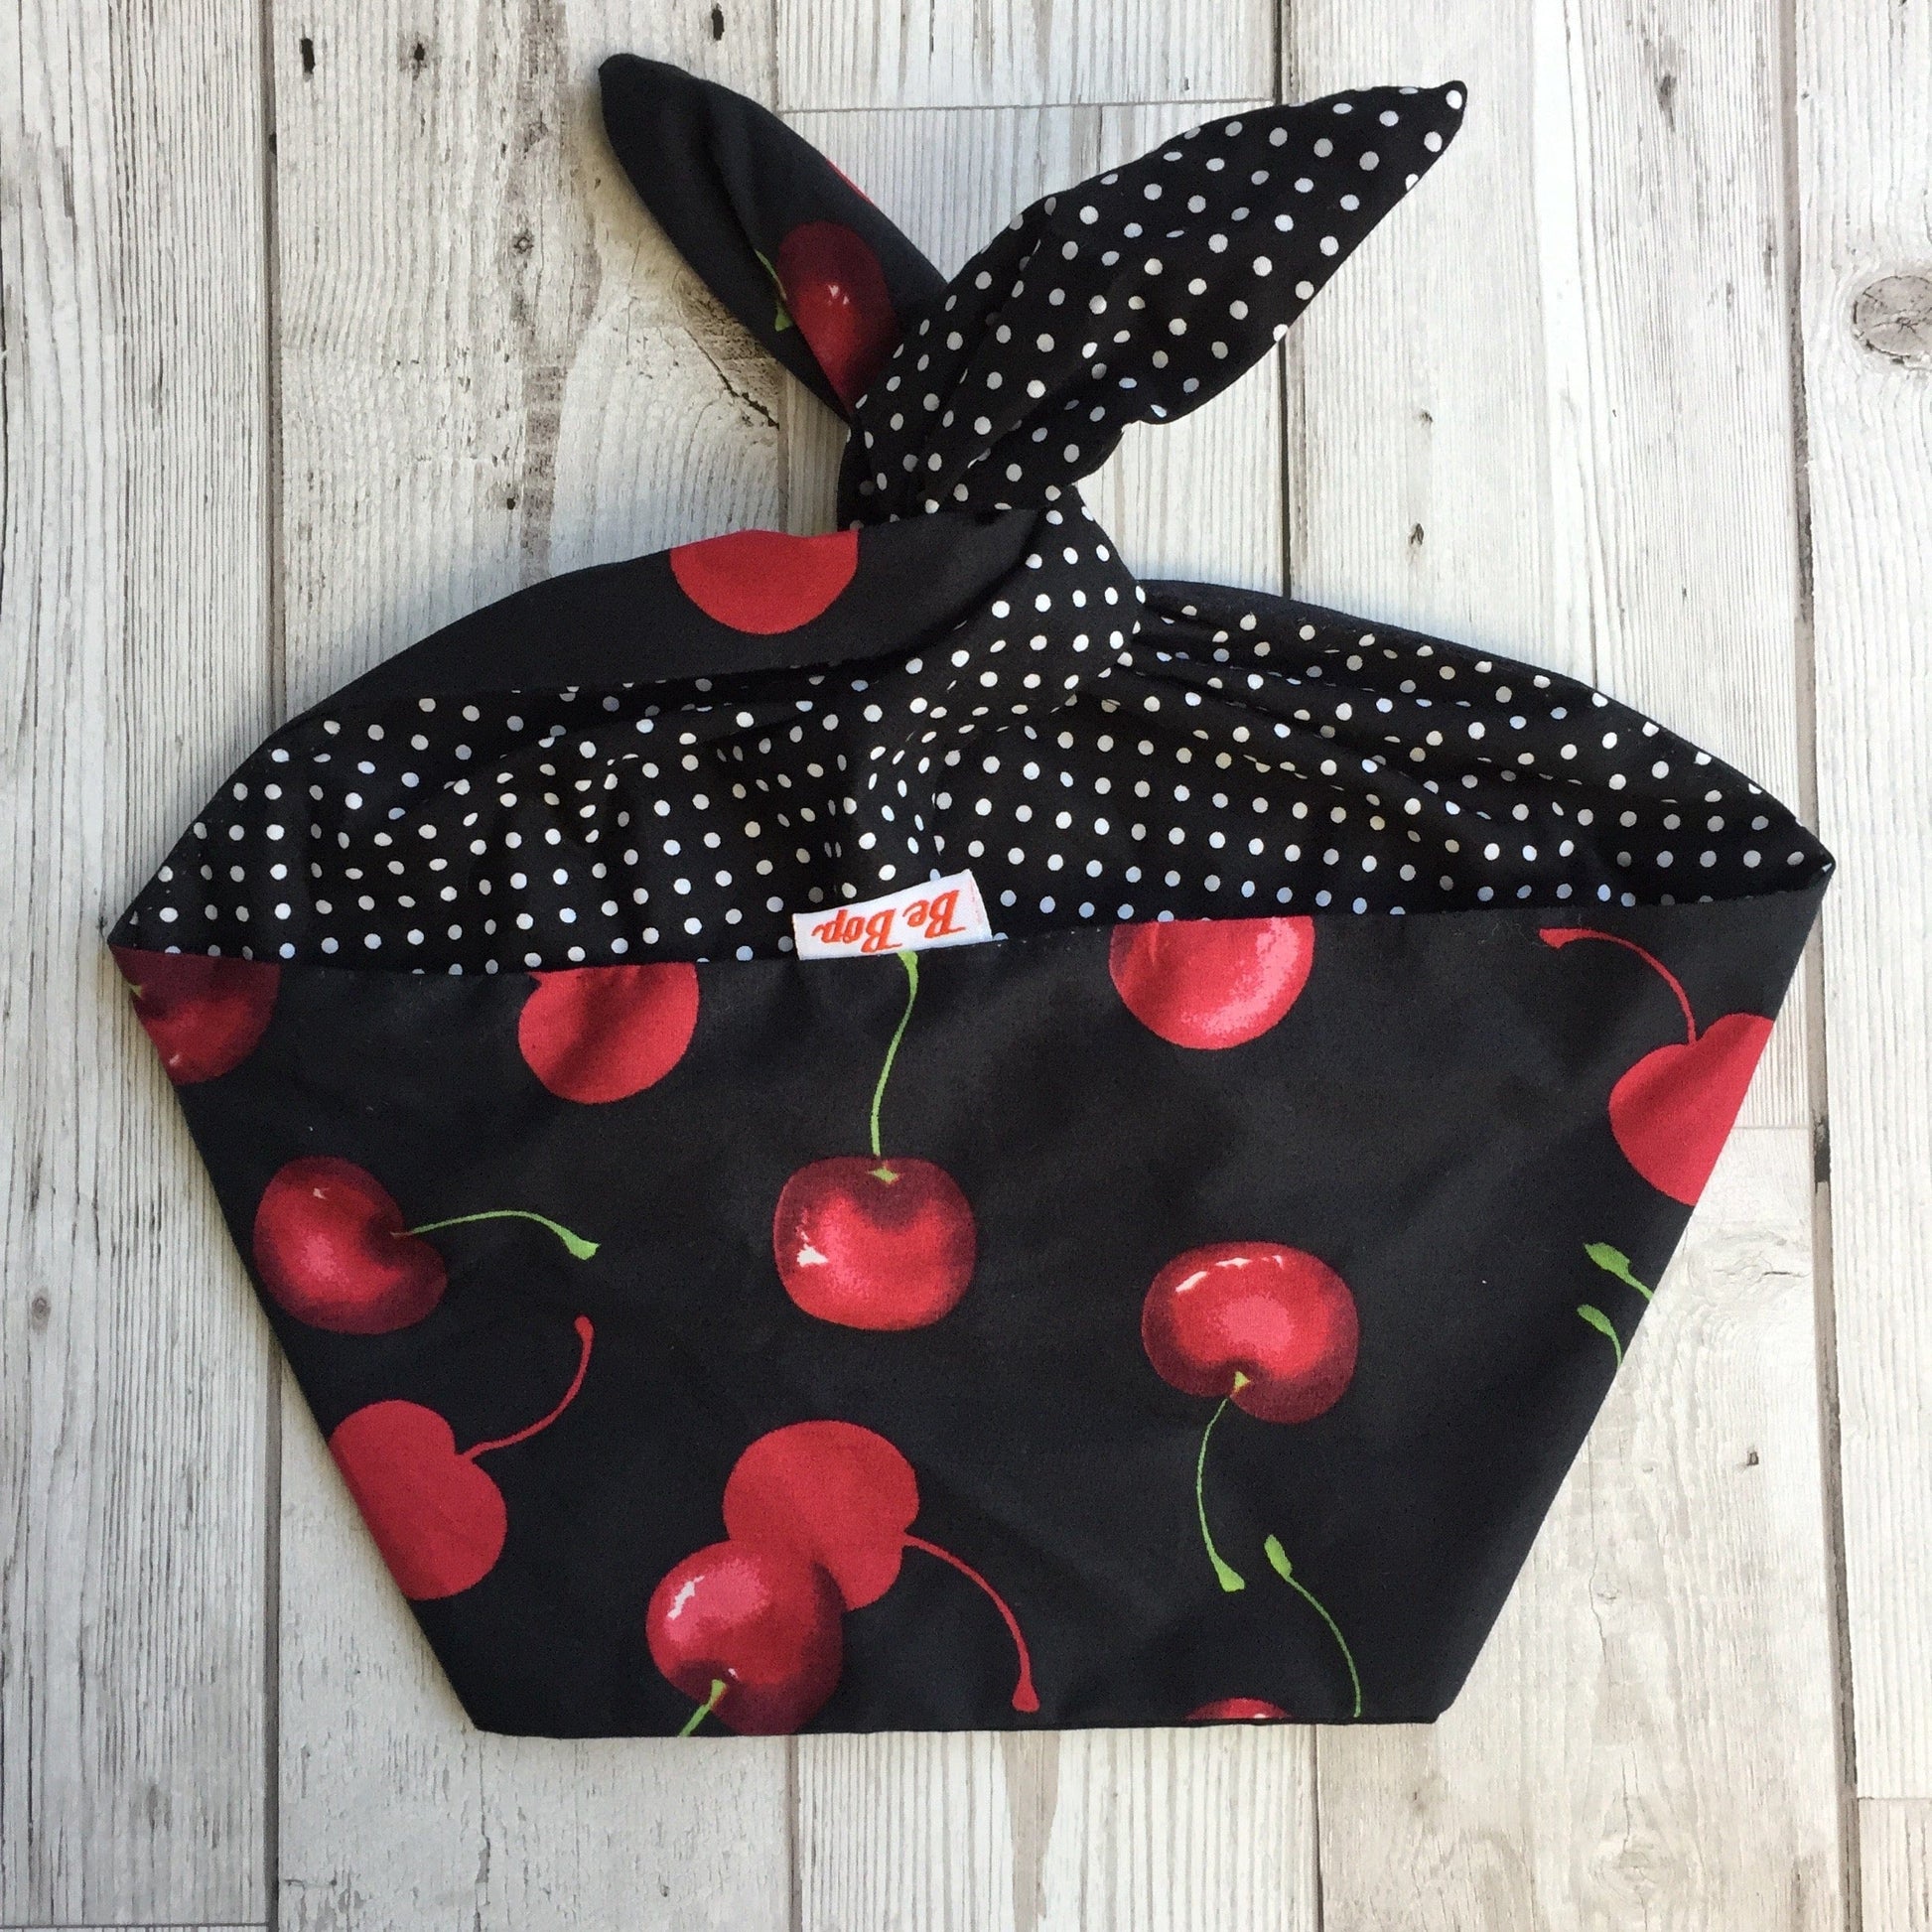 BettyliciousUK Hairband Head Scarf, Black/Cherry Print with Black and White Polka Dots Reverse